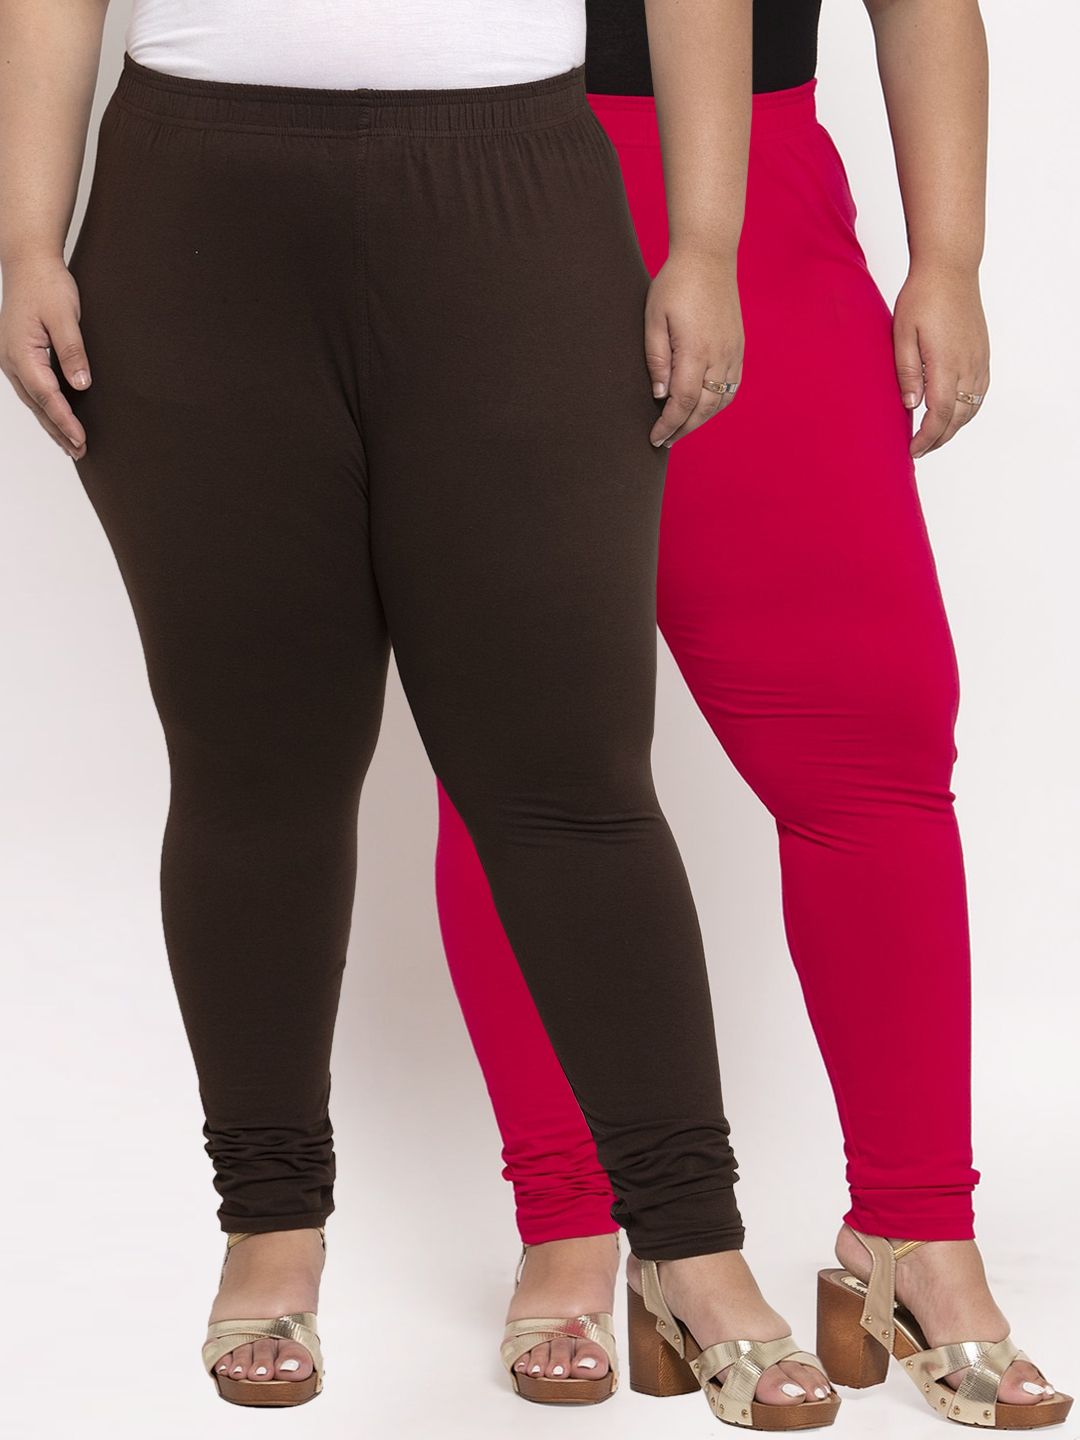 TAG 7 PLUS Women Pack Of 2 Solid Ankle-Length Plus Size Leggings Price in India